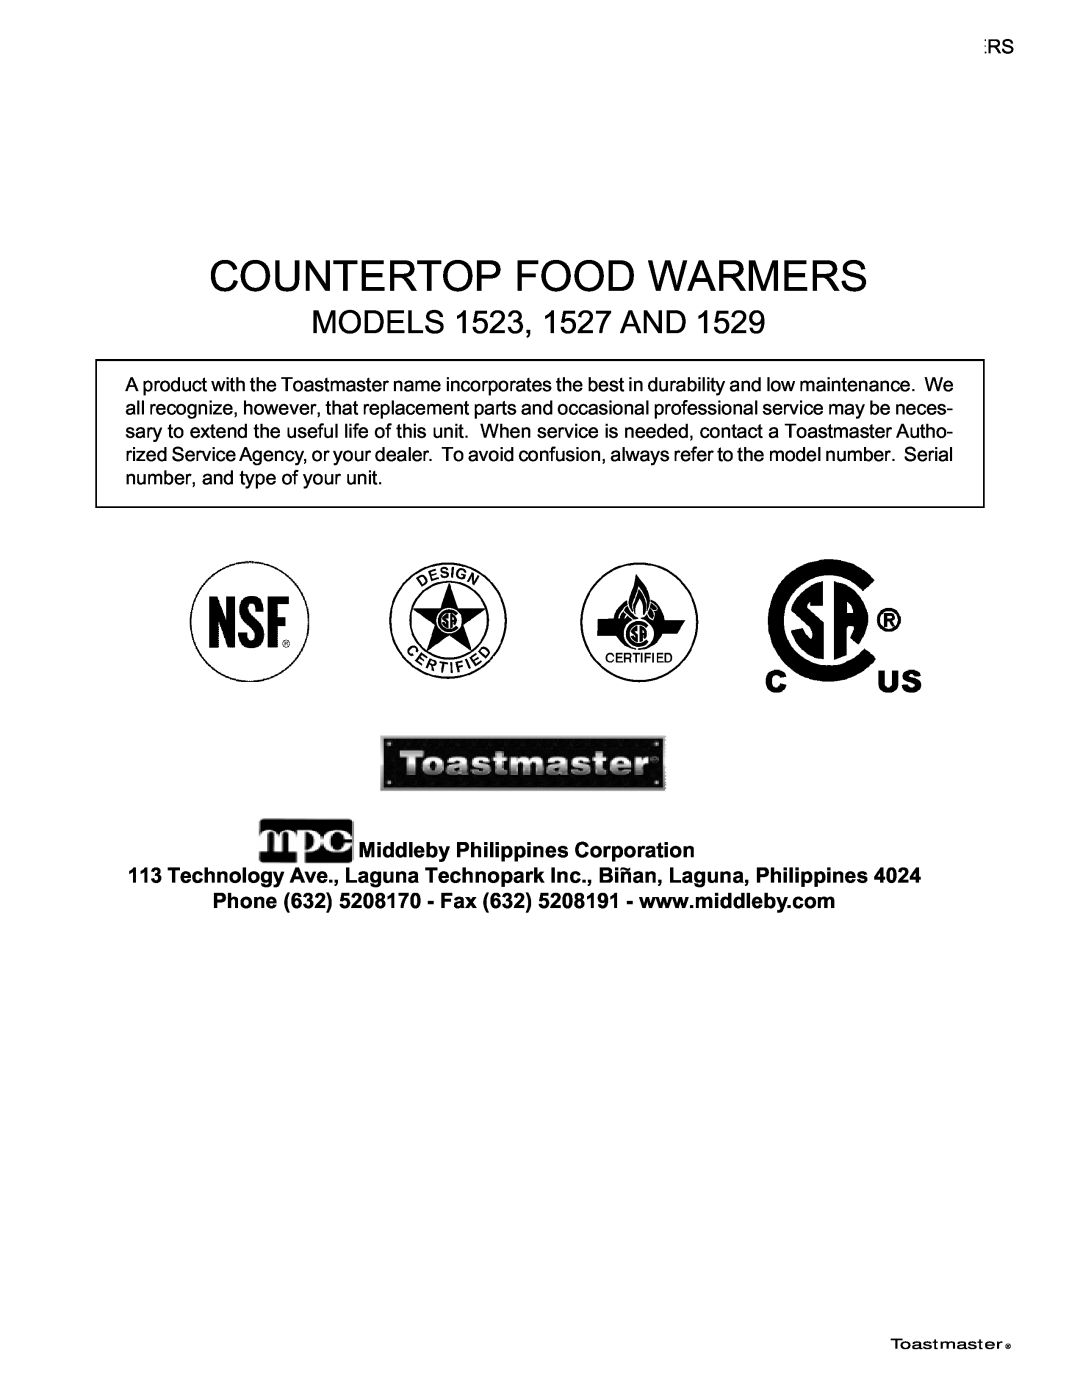 Toastmaster TECF1527, TECF1529, TECF1523 Countertop Food Warmers, MODELS 1523, 1527 AND, Middleby Philippines Corporation 